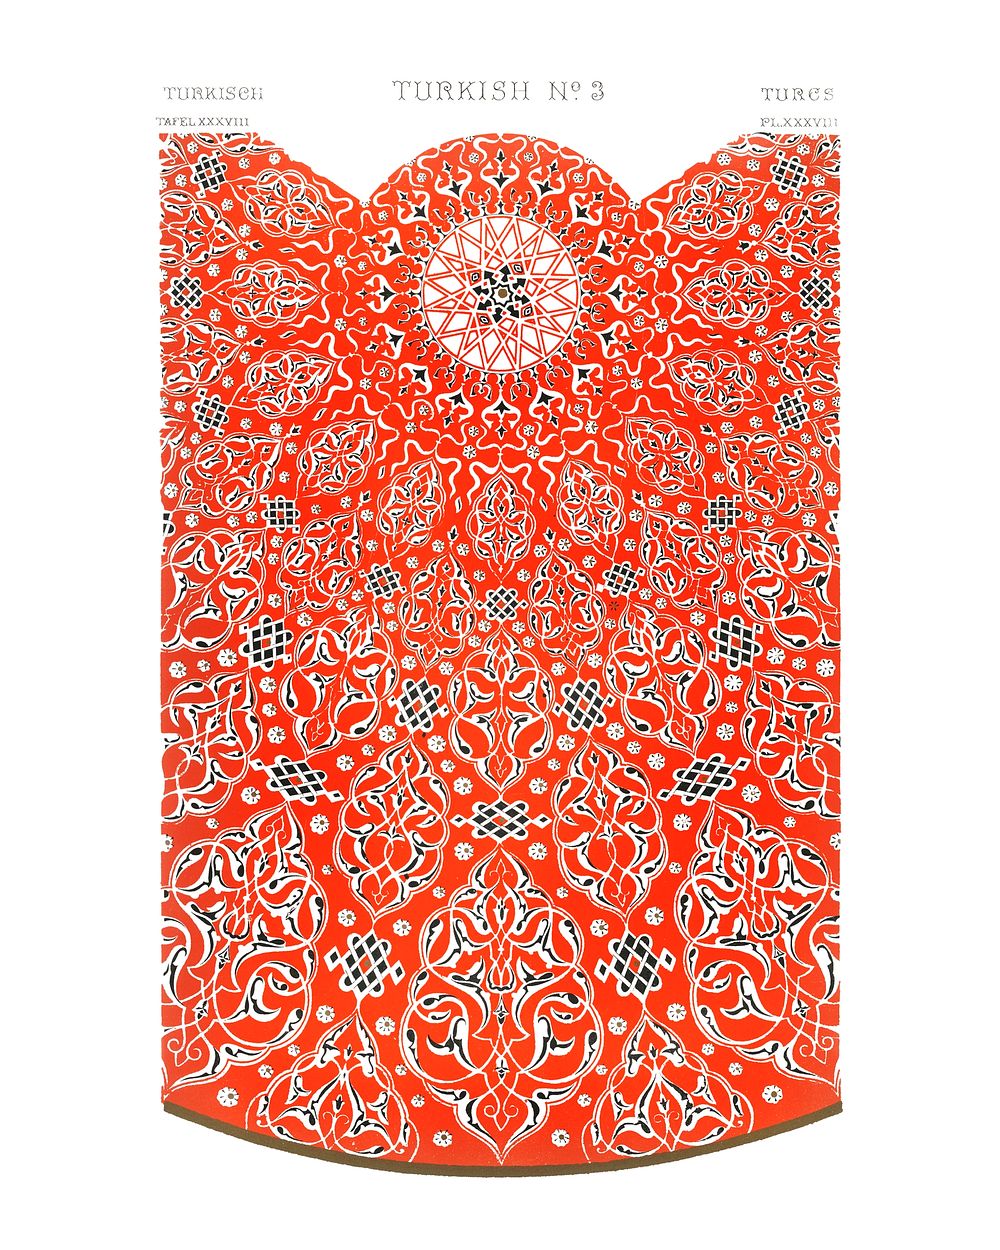 Vintage Turkish pattern wall art print and poster.